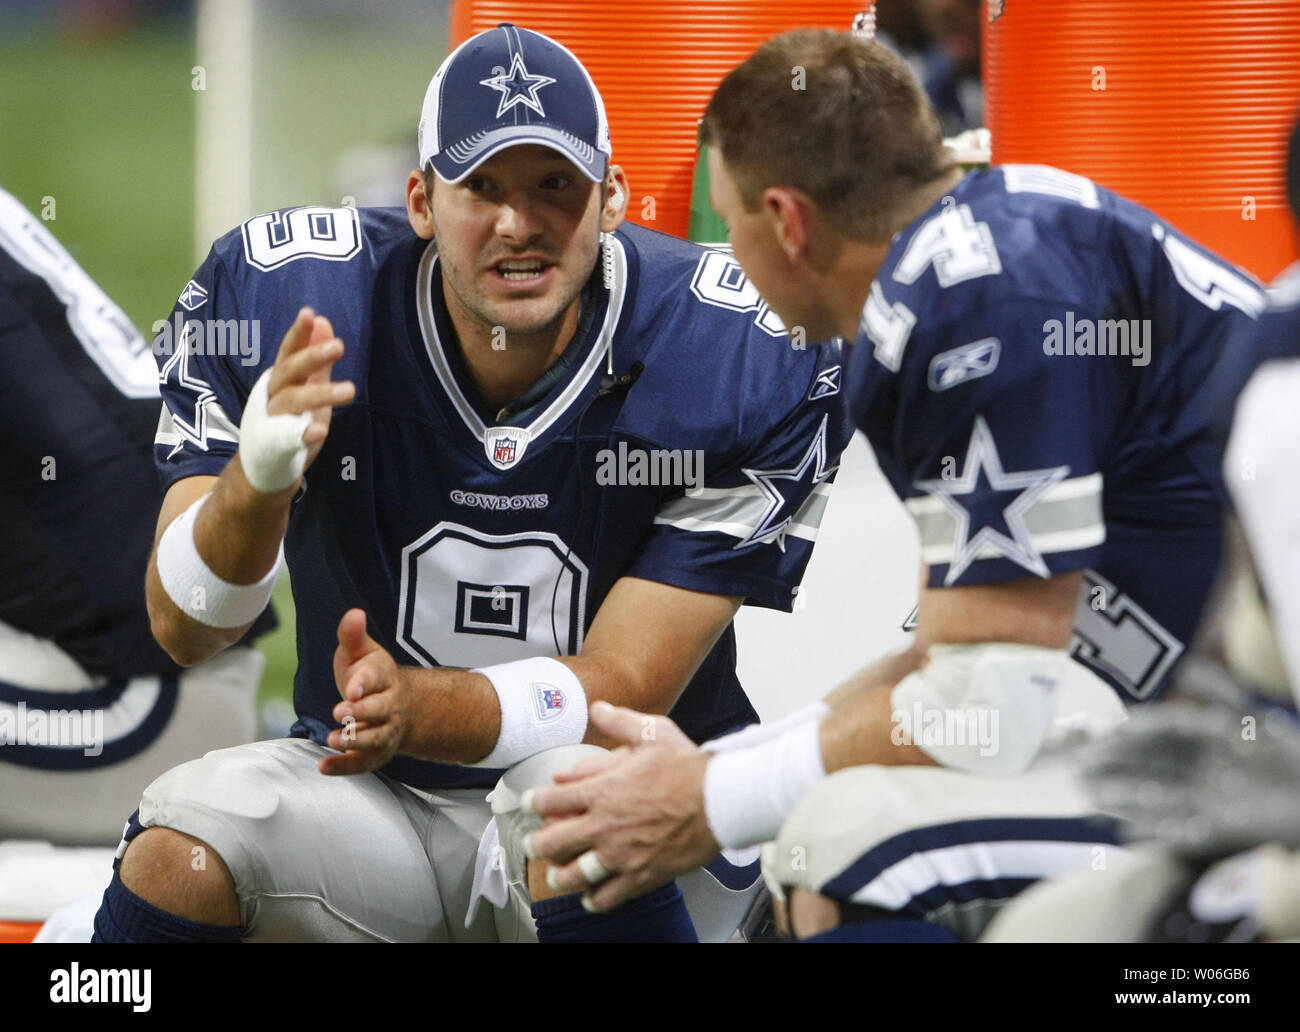 Dallas Cowboys injured quarterback Tony Tomo (L) tries to give backup quarterback Brad Johnson late in the game against the St. Louis Rams at the Edward Jones Dome in St. Louis on October 19, 2008. St. Louis defeated Dallas 34-14. (UPI Photo/Bill Greenblatt) Stock Photo